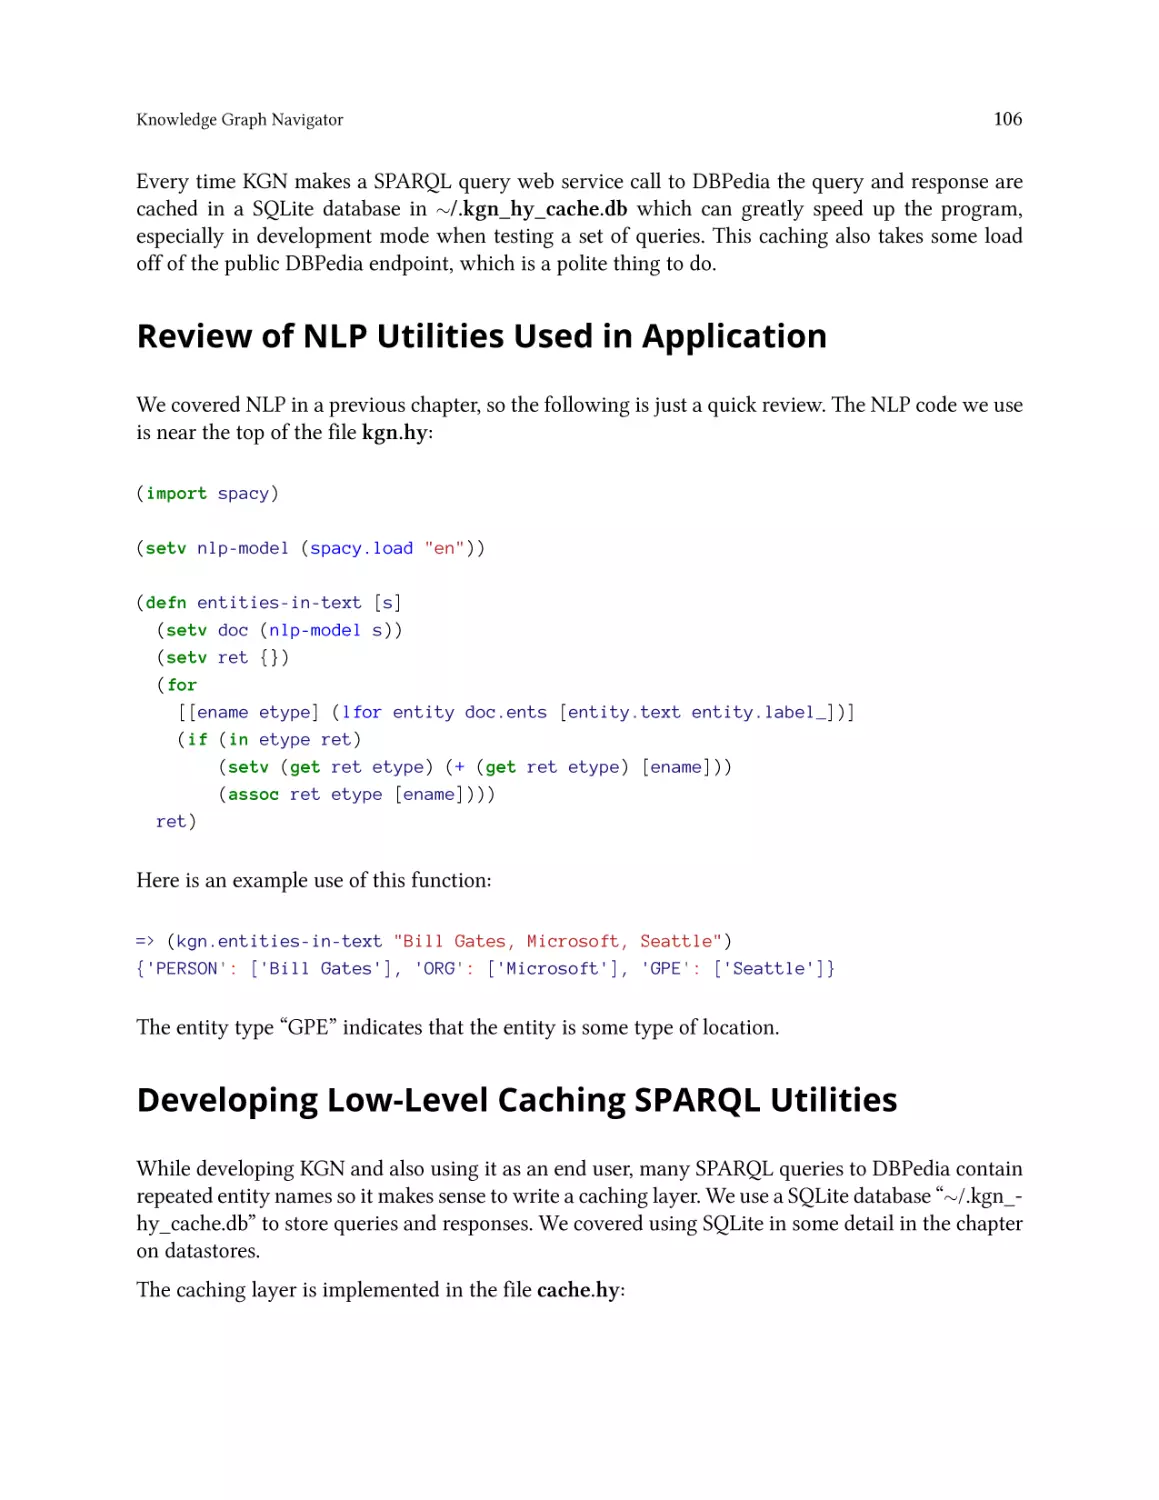 Review of NLP Utilities Used in Application
Developing Low-Level Caching SPARQL Utilities